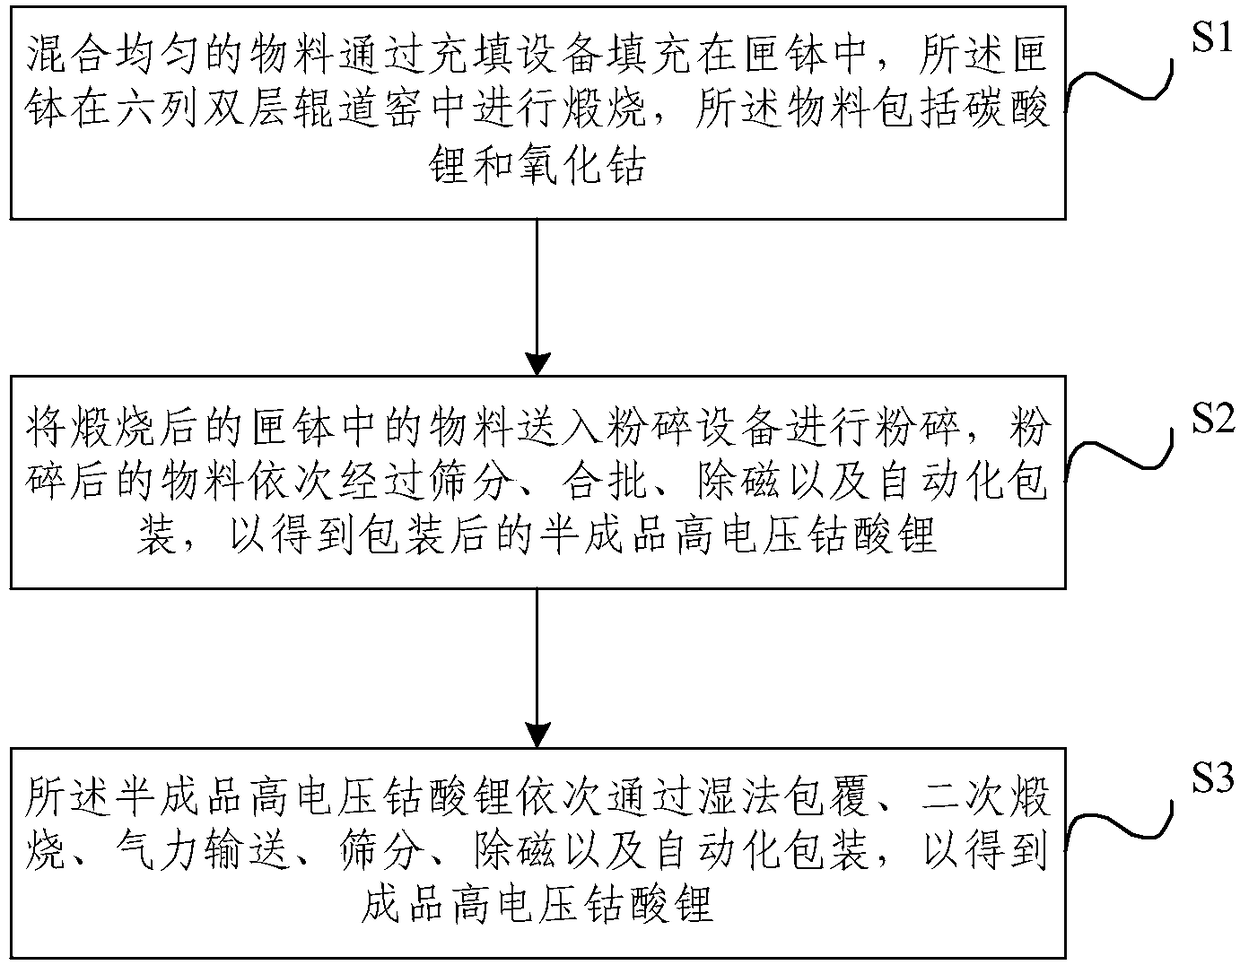 Automation production method used for producing high-voltage lithium cobalt oxide